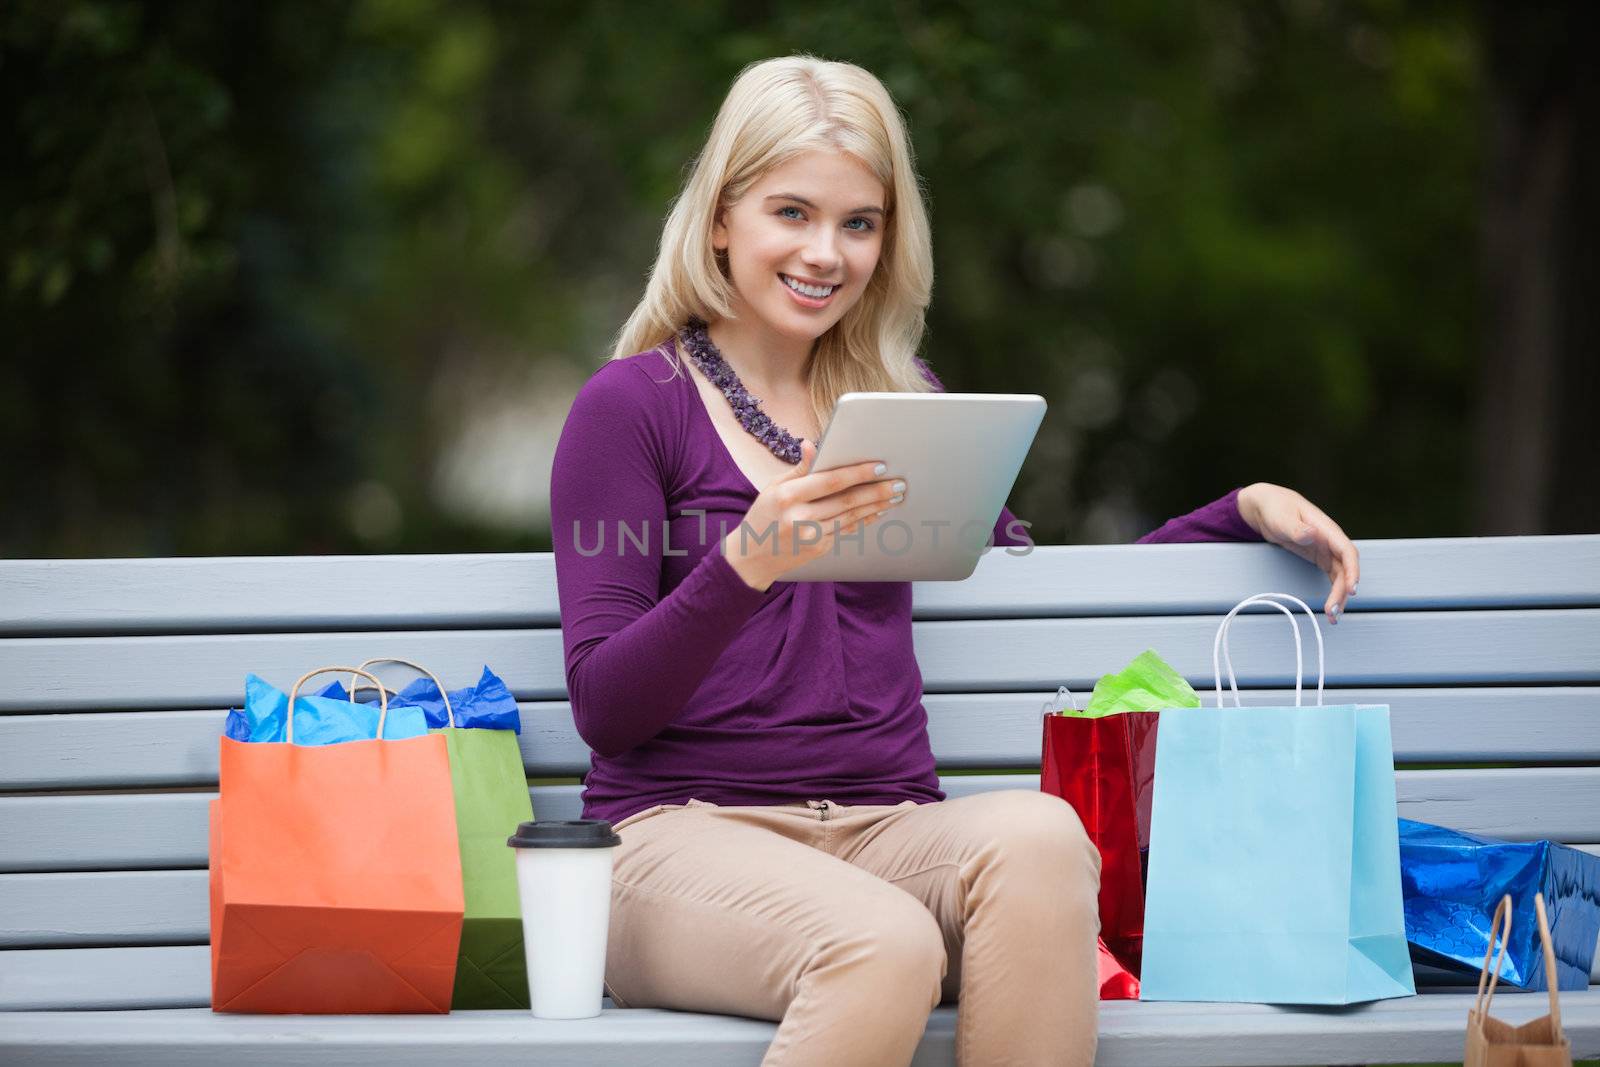 Portrait of pretty young woman with shopping bags using tablet PC on park bench